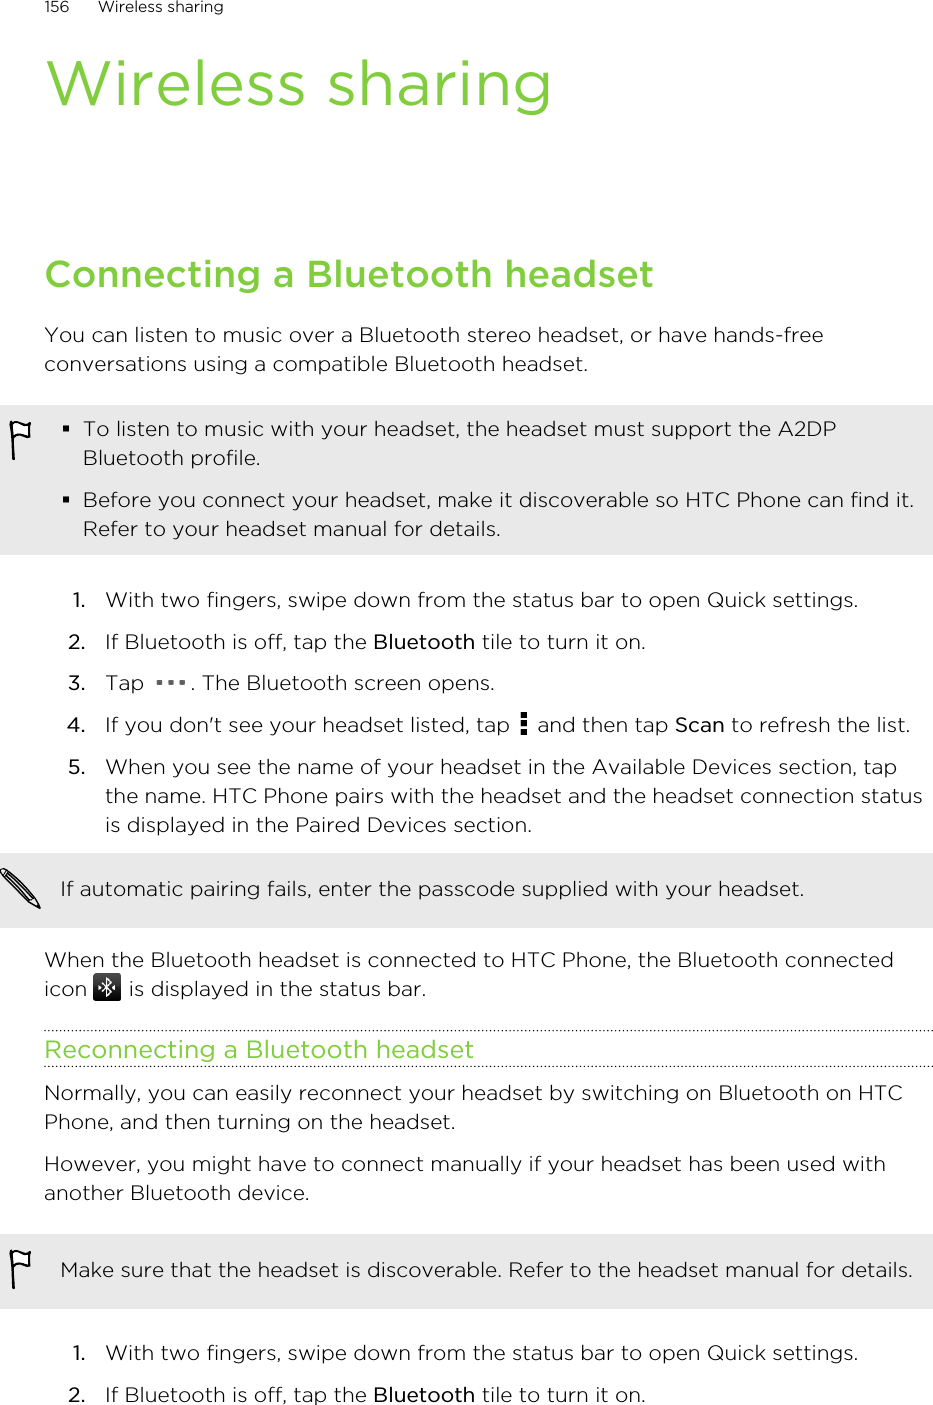 Wireless sharingConnecting a Bluetooth headsetYou can listen to music over a Bluetooth stereo headset, or have hands-freeconversations using a compatible Bluetooth headset.§To listen to music with your headset, the headset must support the A2DPBluetooth profile.§Before you connect your headset, make it discoverable so HTC Phone can find it.Refer to your headset manual for details.1. With two fingers, swipe down from the status bar to open Quick settings.2. If Bluetooth is off, tap the Bluetooth tile to turn it on.3. Tap  . The Bluetooth screen opens.4. If you don&apos;t see your headset listed, tap   and then tap Scan to refresh the list.5. When you see the name of your headset in the Available Devices section, tapthe name. HTC Phone pairs with the headset and the headset connection statusis displayed in the Paired Devices section.If automatic pairing fails, enter the passcode supplied with your headset.When the Bluetooth headset is connected to HTC Phone, the Bluetooth connectedicon   is displayed in the status bar.Reconnecting a Bluetooth headsetNormally, you can easily reconnect your headset by switching on Bluetooth on HTCPhone, and then turning on the headset.However, you might have to connect manually if your headset has been used withanother Bluetooth device.Make sure that the headset is discoverable. Refer to the headset manual for details.1. With two fingers, swipe down from the status bar to open Quick settings.2. If Bluetooth is off, tap the Bluetooth tile to turn it on.156 Wireless sharingHTC Confidential for Certification HTC Confidential for Certification 